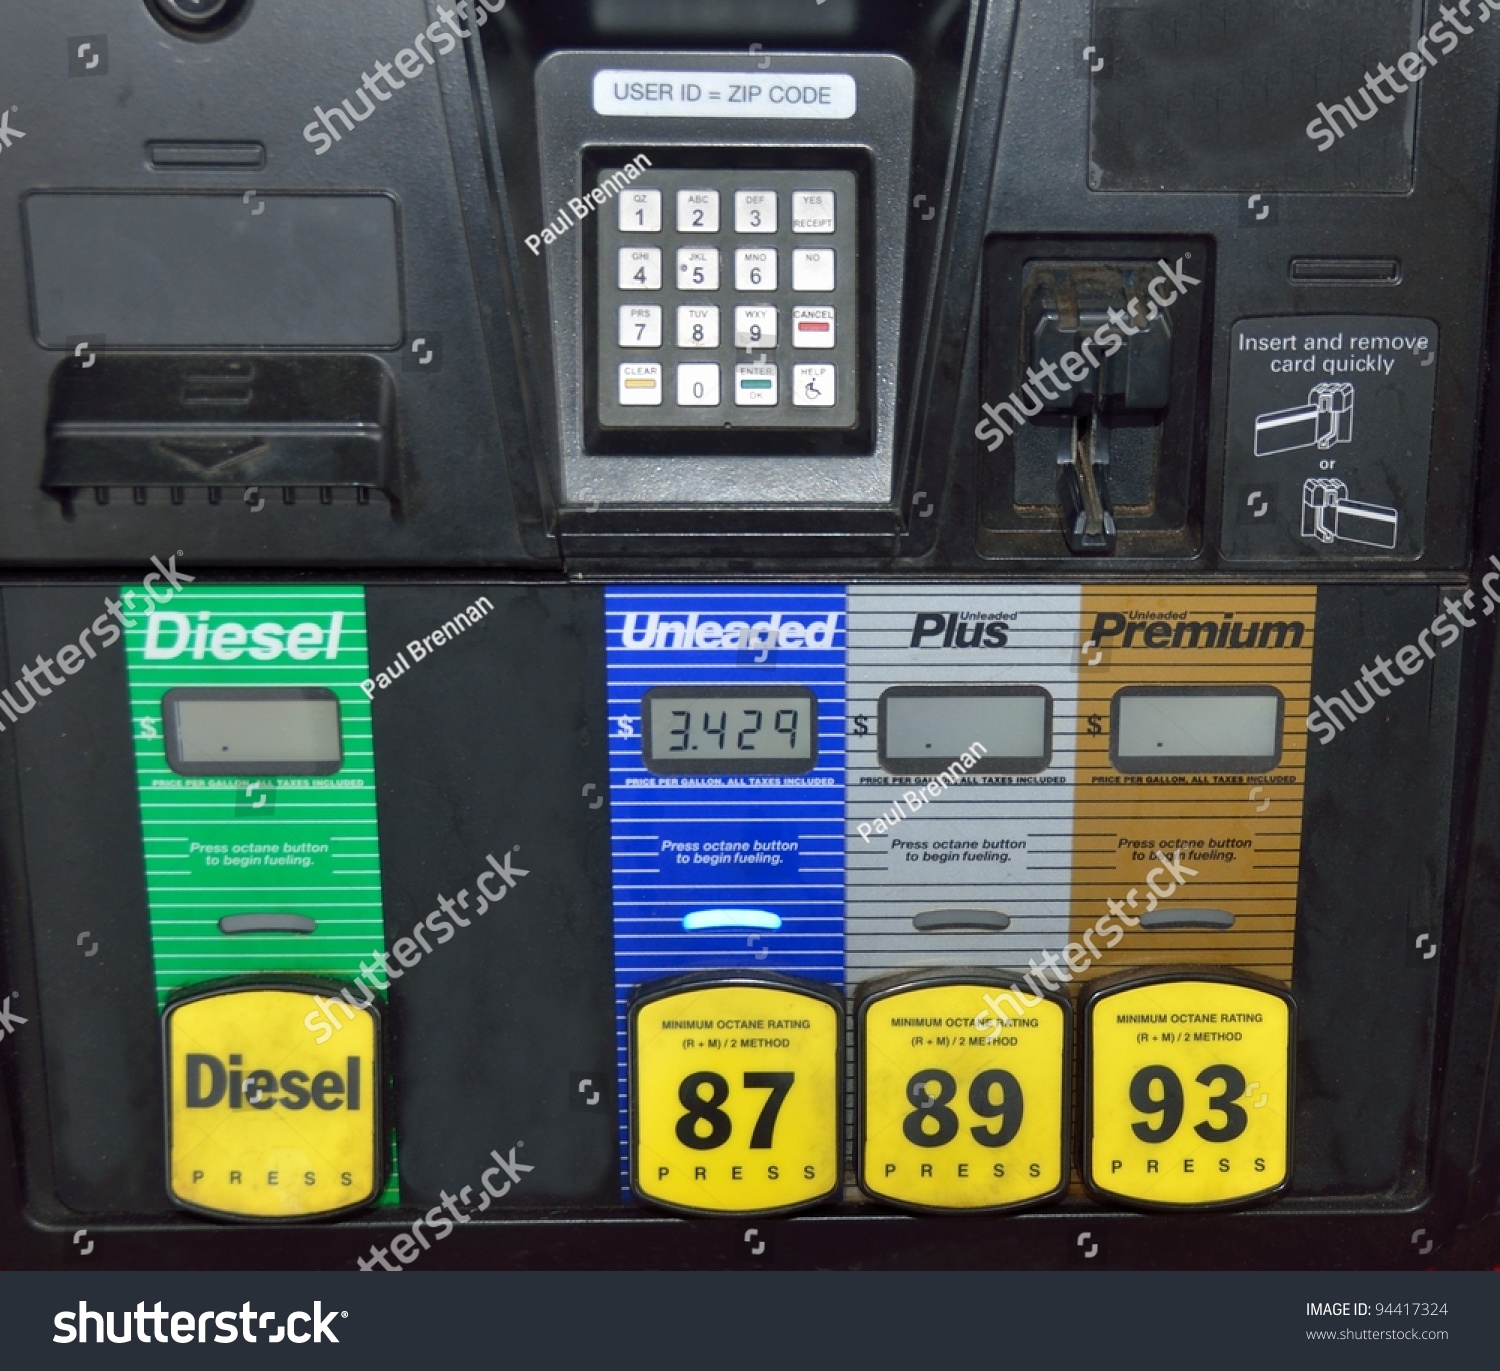 How do you locate diesel fuel stations?